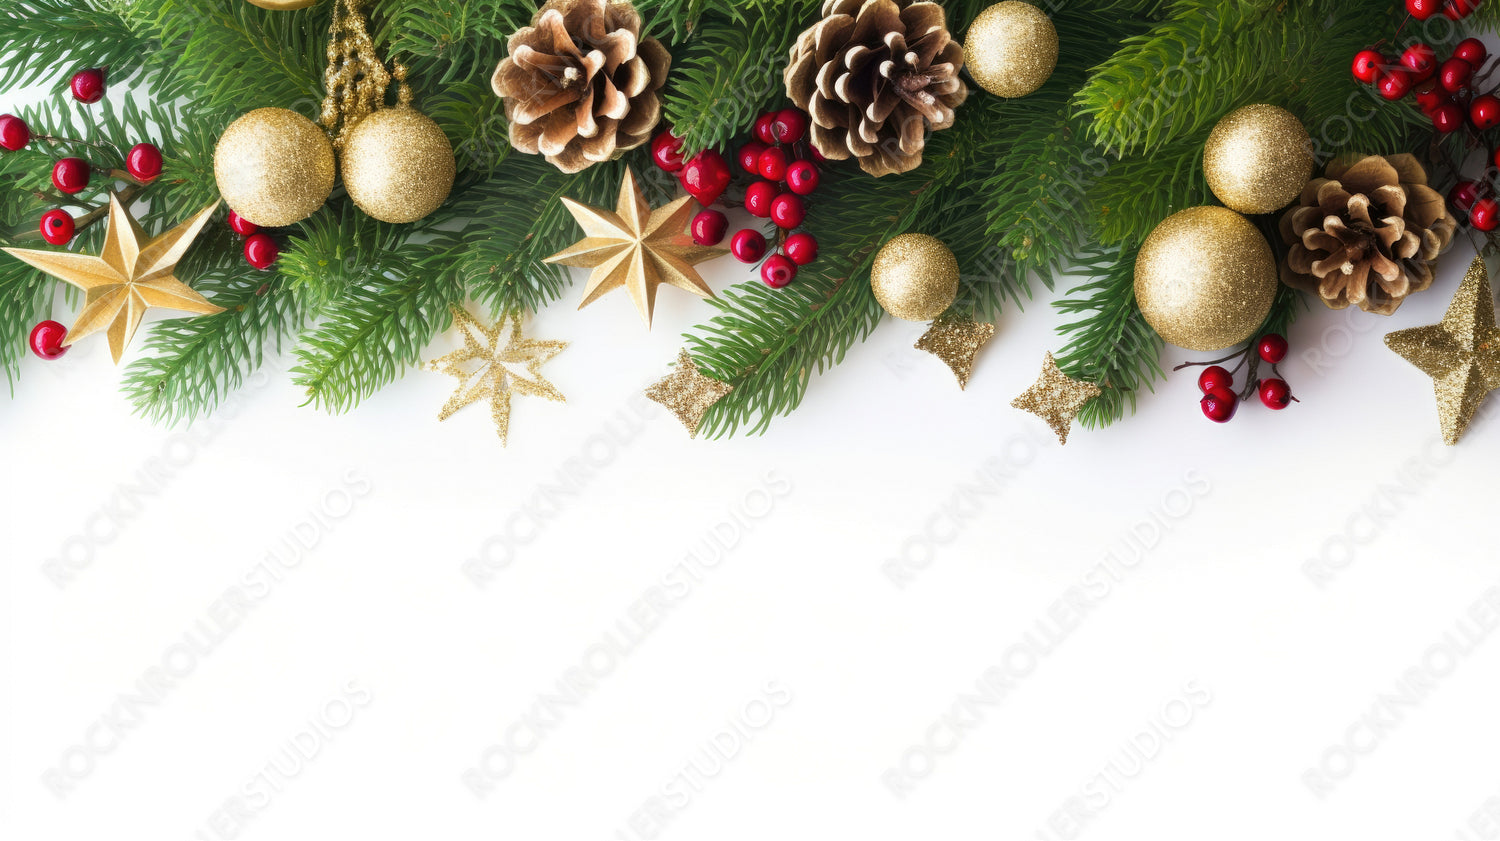 Festive Christmas border, isolated on white background. Fir green branches are decorated with gold stars, fir cones and red berries. Close-up, copy space.